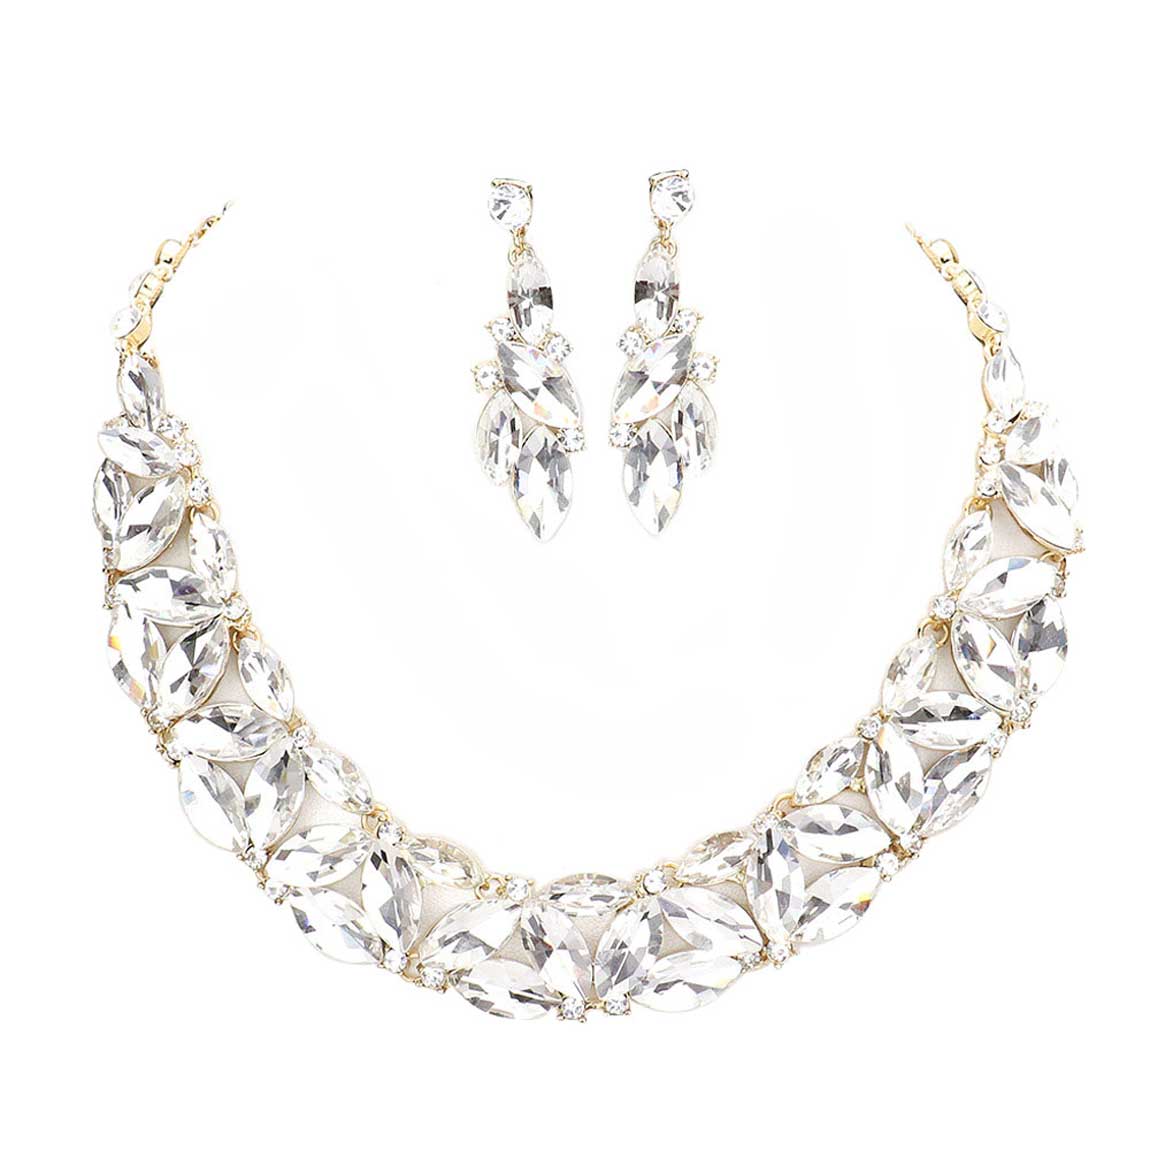 Gold Marquise Stone Cluster Evening Necklace. These gorgeous stone pieces will show your class in any special occasion. The elegance of these stone goes unmatched, great for wearing at a party! Perfect jewelry to enhance your look. Awesome gift for birthday, Anniversary, Valentine’s Day or any special occasion.